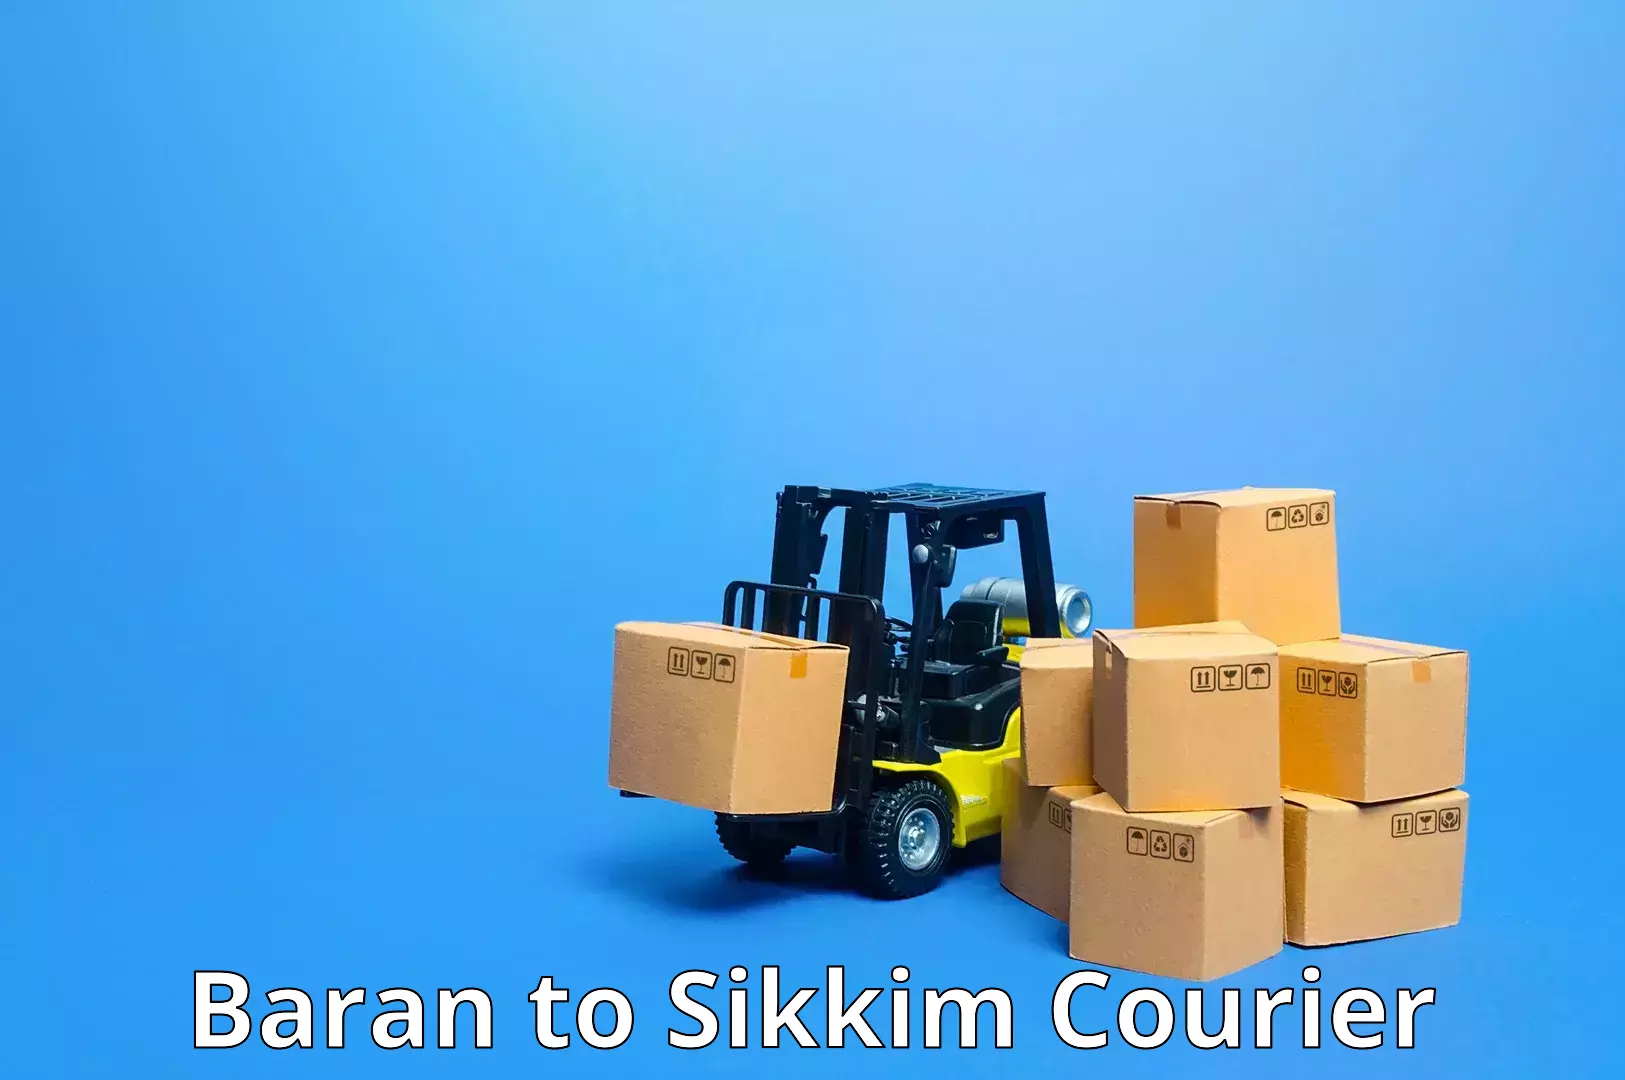 Enhanced shipping experience Baran to East Sikkim